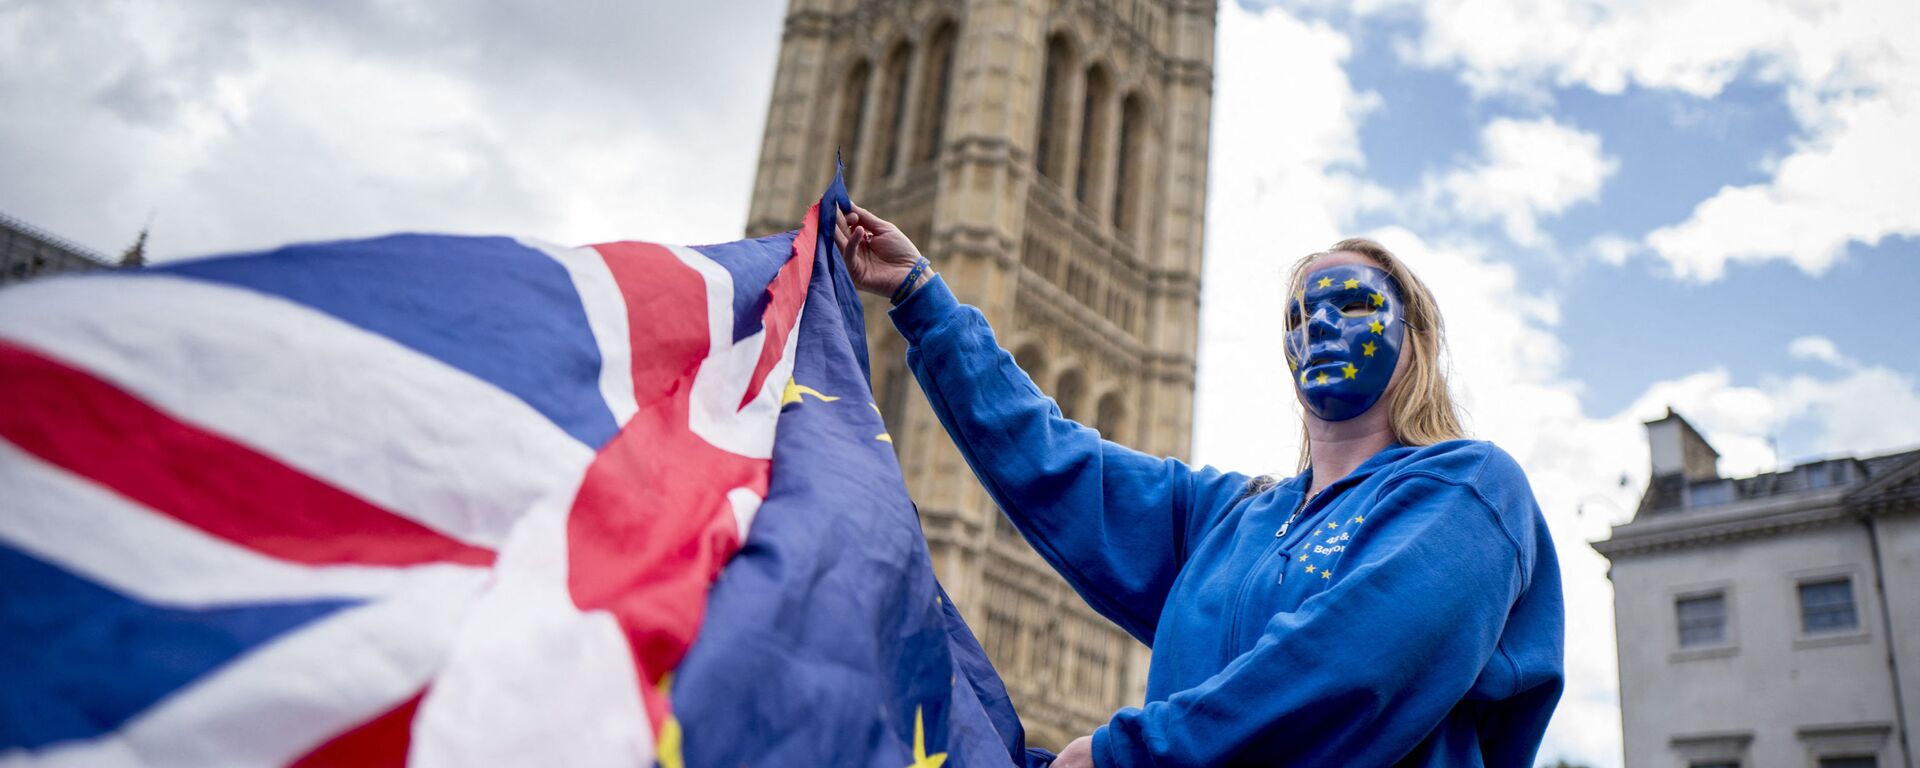 A Pro-European Union protester holds Union and European flags in front of the Victoria Tower at The Palace of Westminster in central London on September 13, 2017, ahead of a rally to warn about the terms of Brexit, by EU nationals in Britain and UK nationals in Europe - Sputnik International, 1920, 28.05.2023